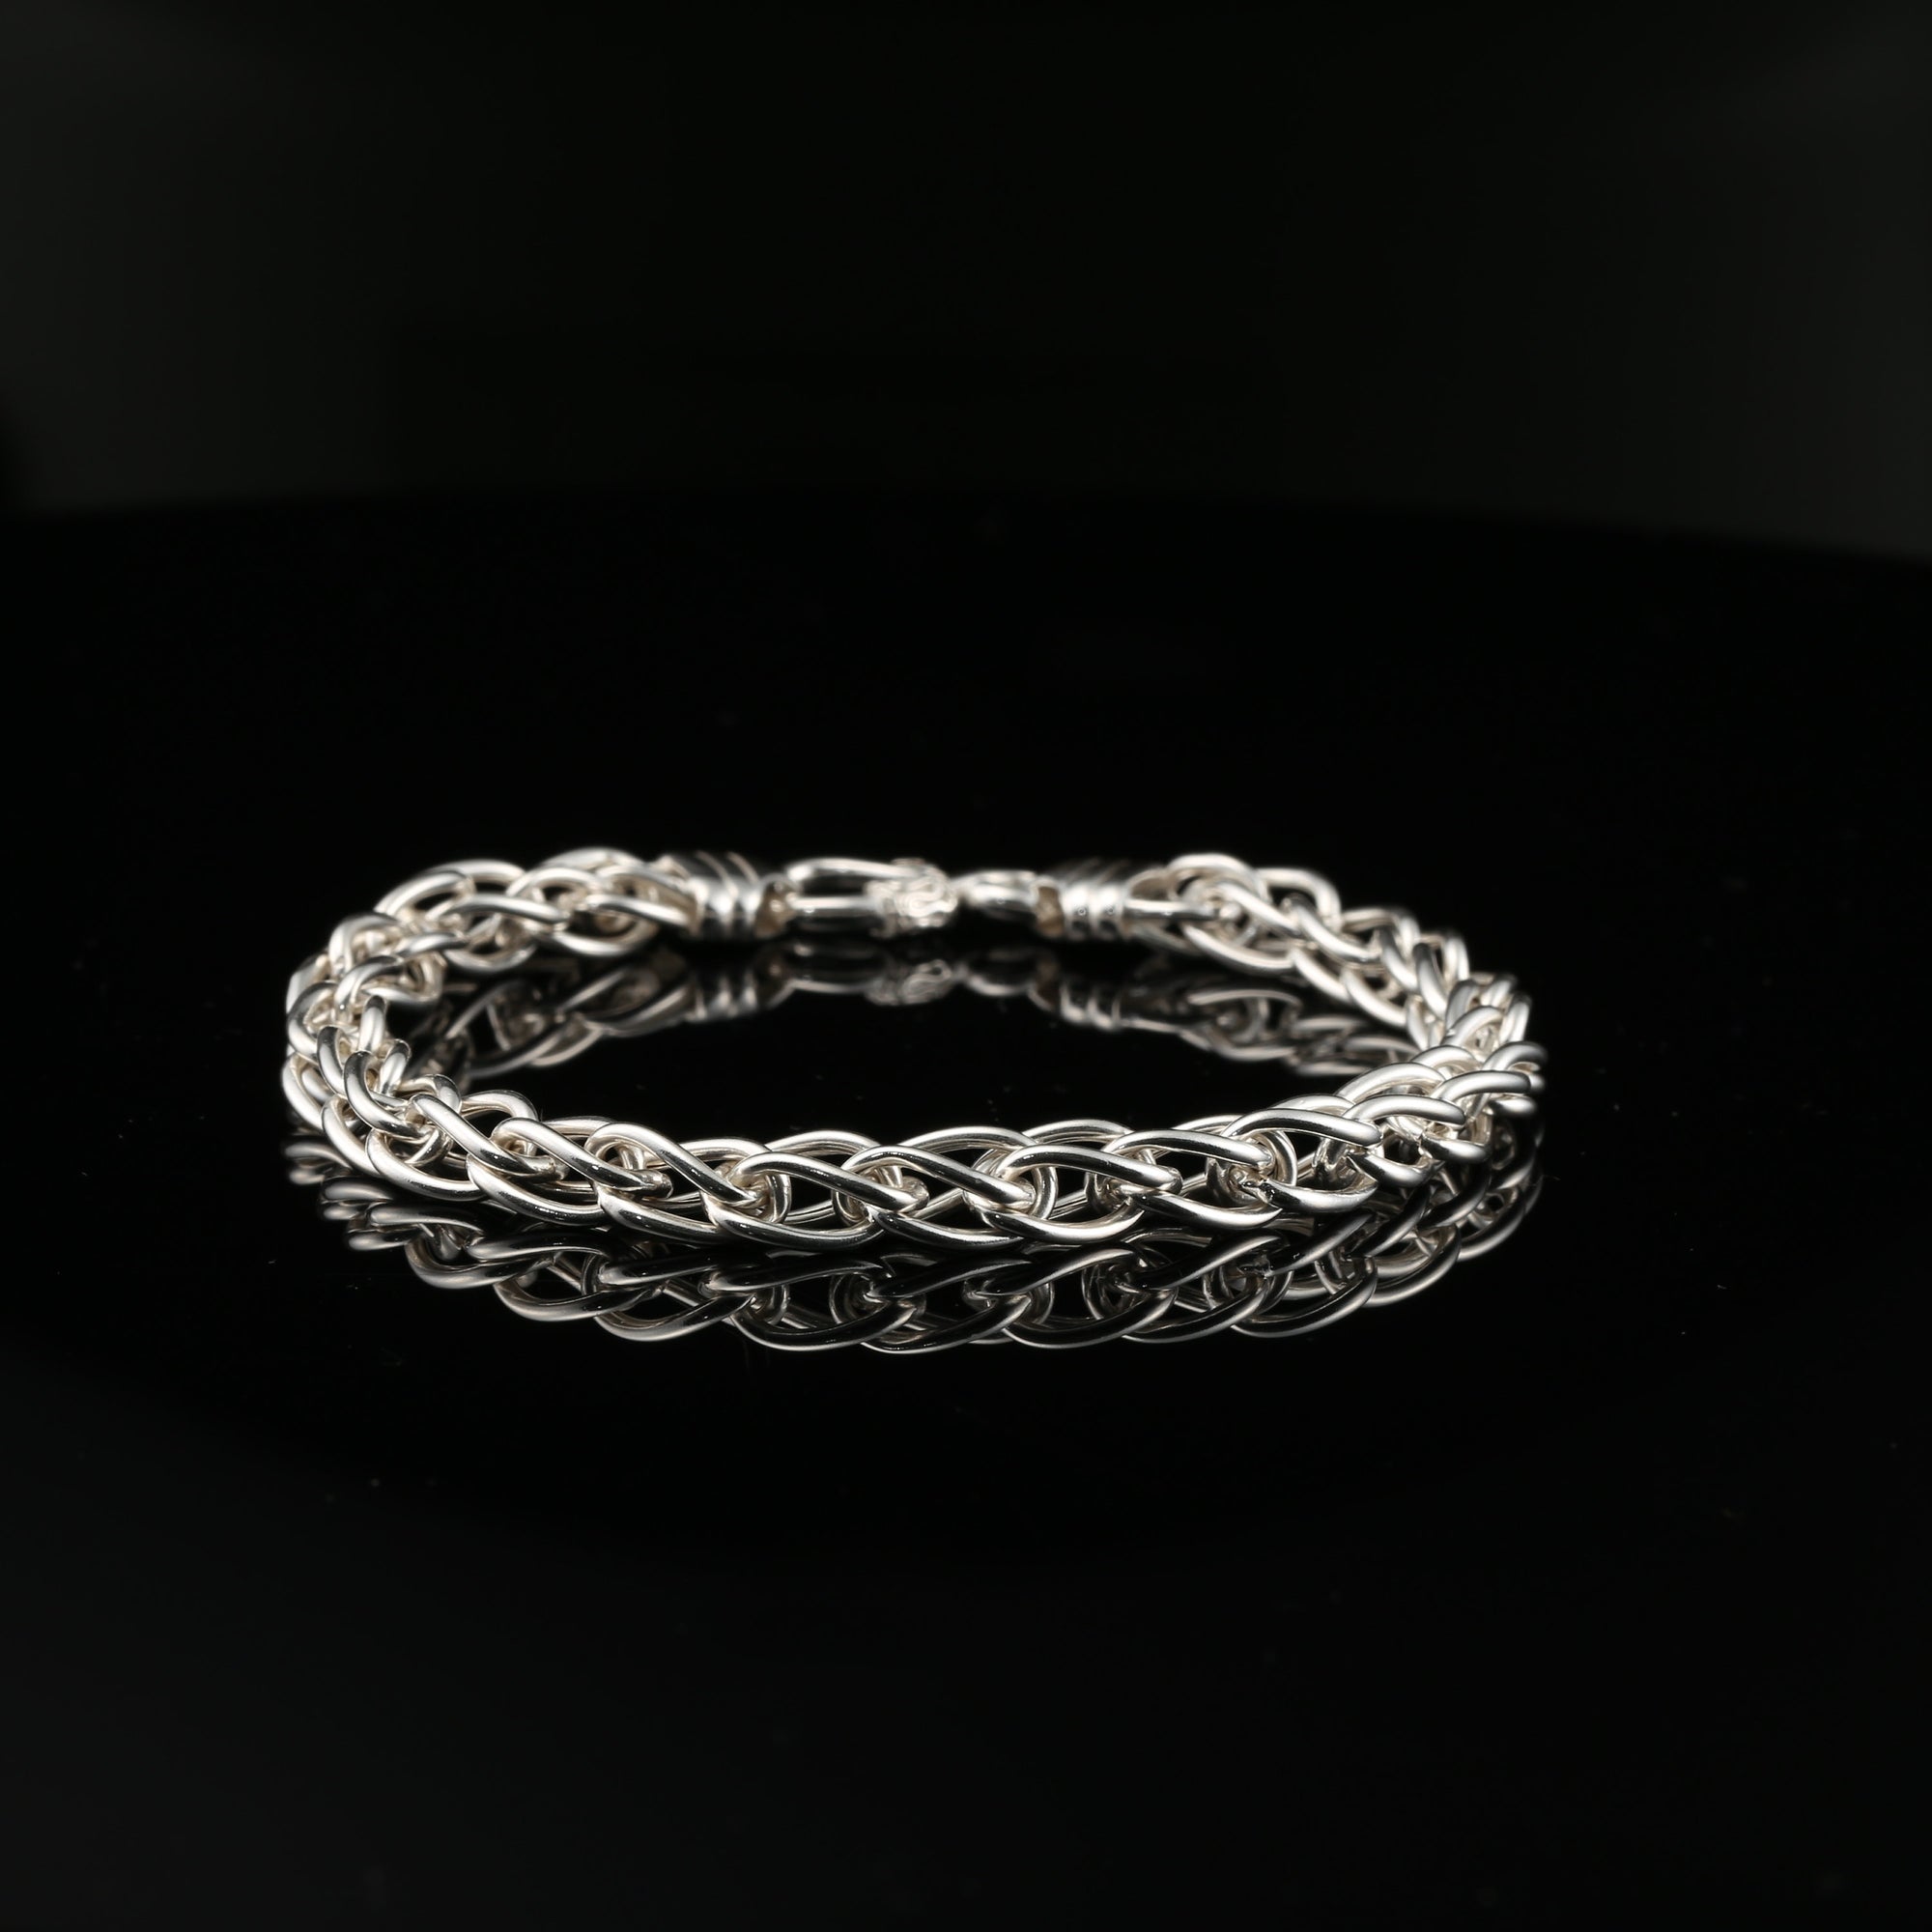 Handmade Byzantine Chain Bracelet with S-Hook Clasp, 8&amp;quot;, Unisex in Sterling Silver